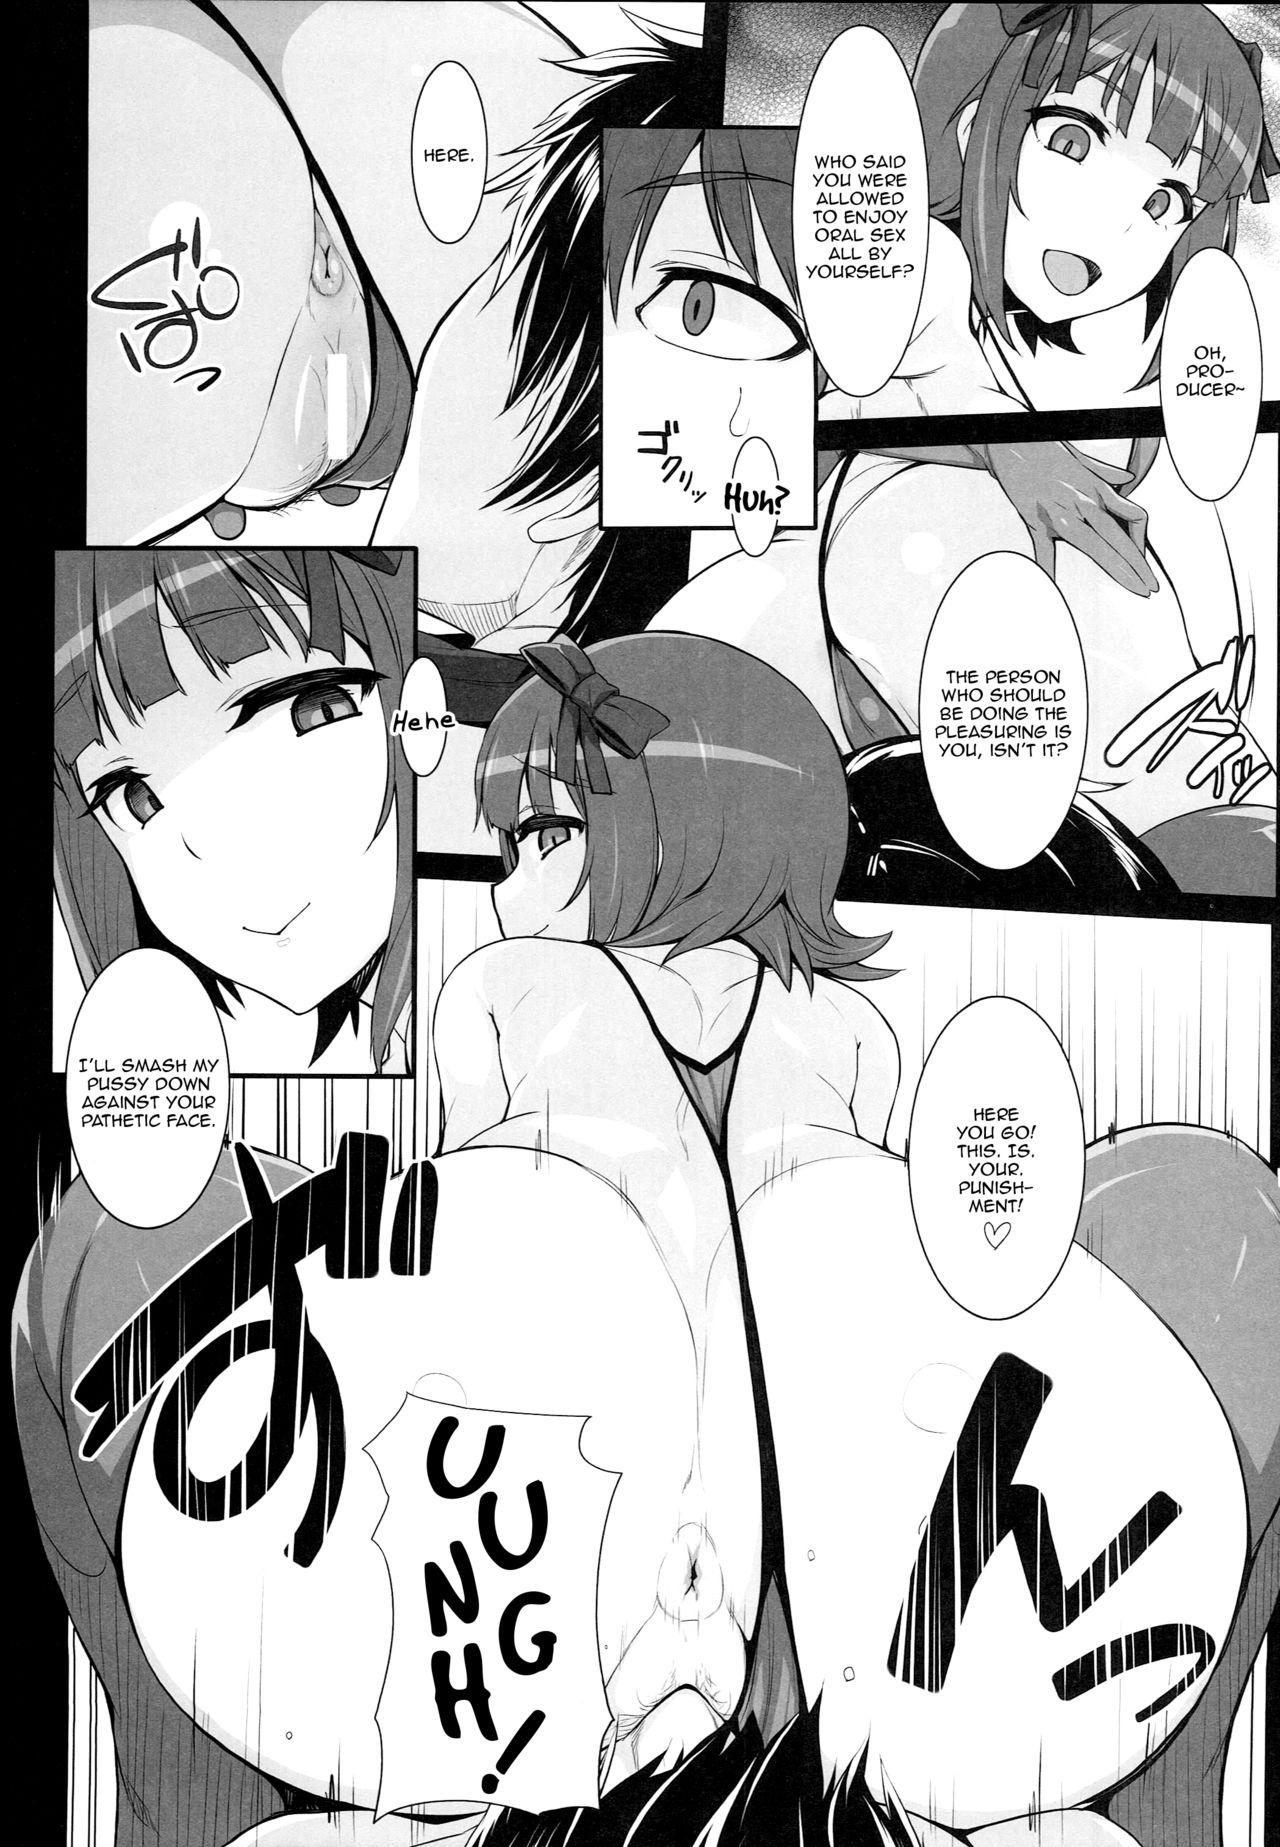 Cousin Double Haruka Returns! - The idolmaster 18yearsold - Page 9